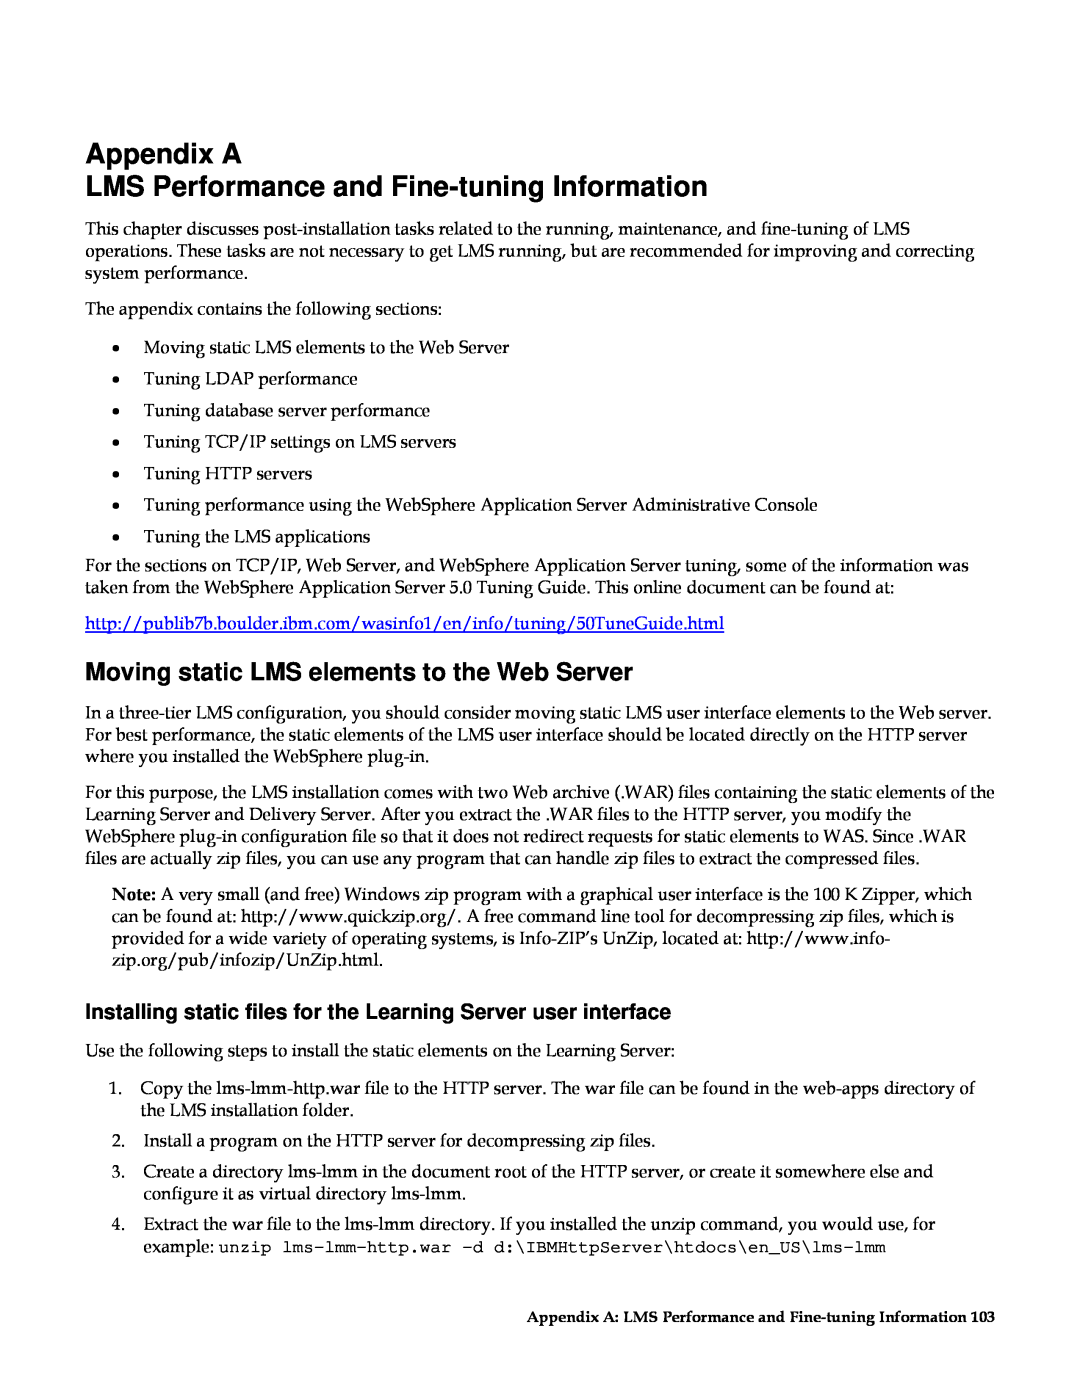 IBM G210-1784-00 Appendix A LMS Performance and Fine-tuning Information, Moving static LMS elements to the Web Server 